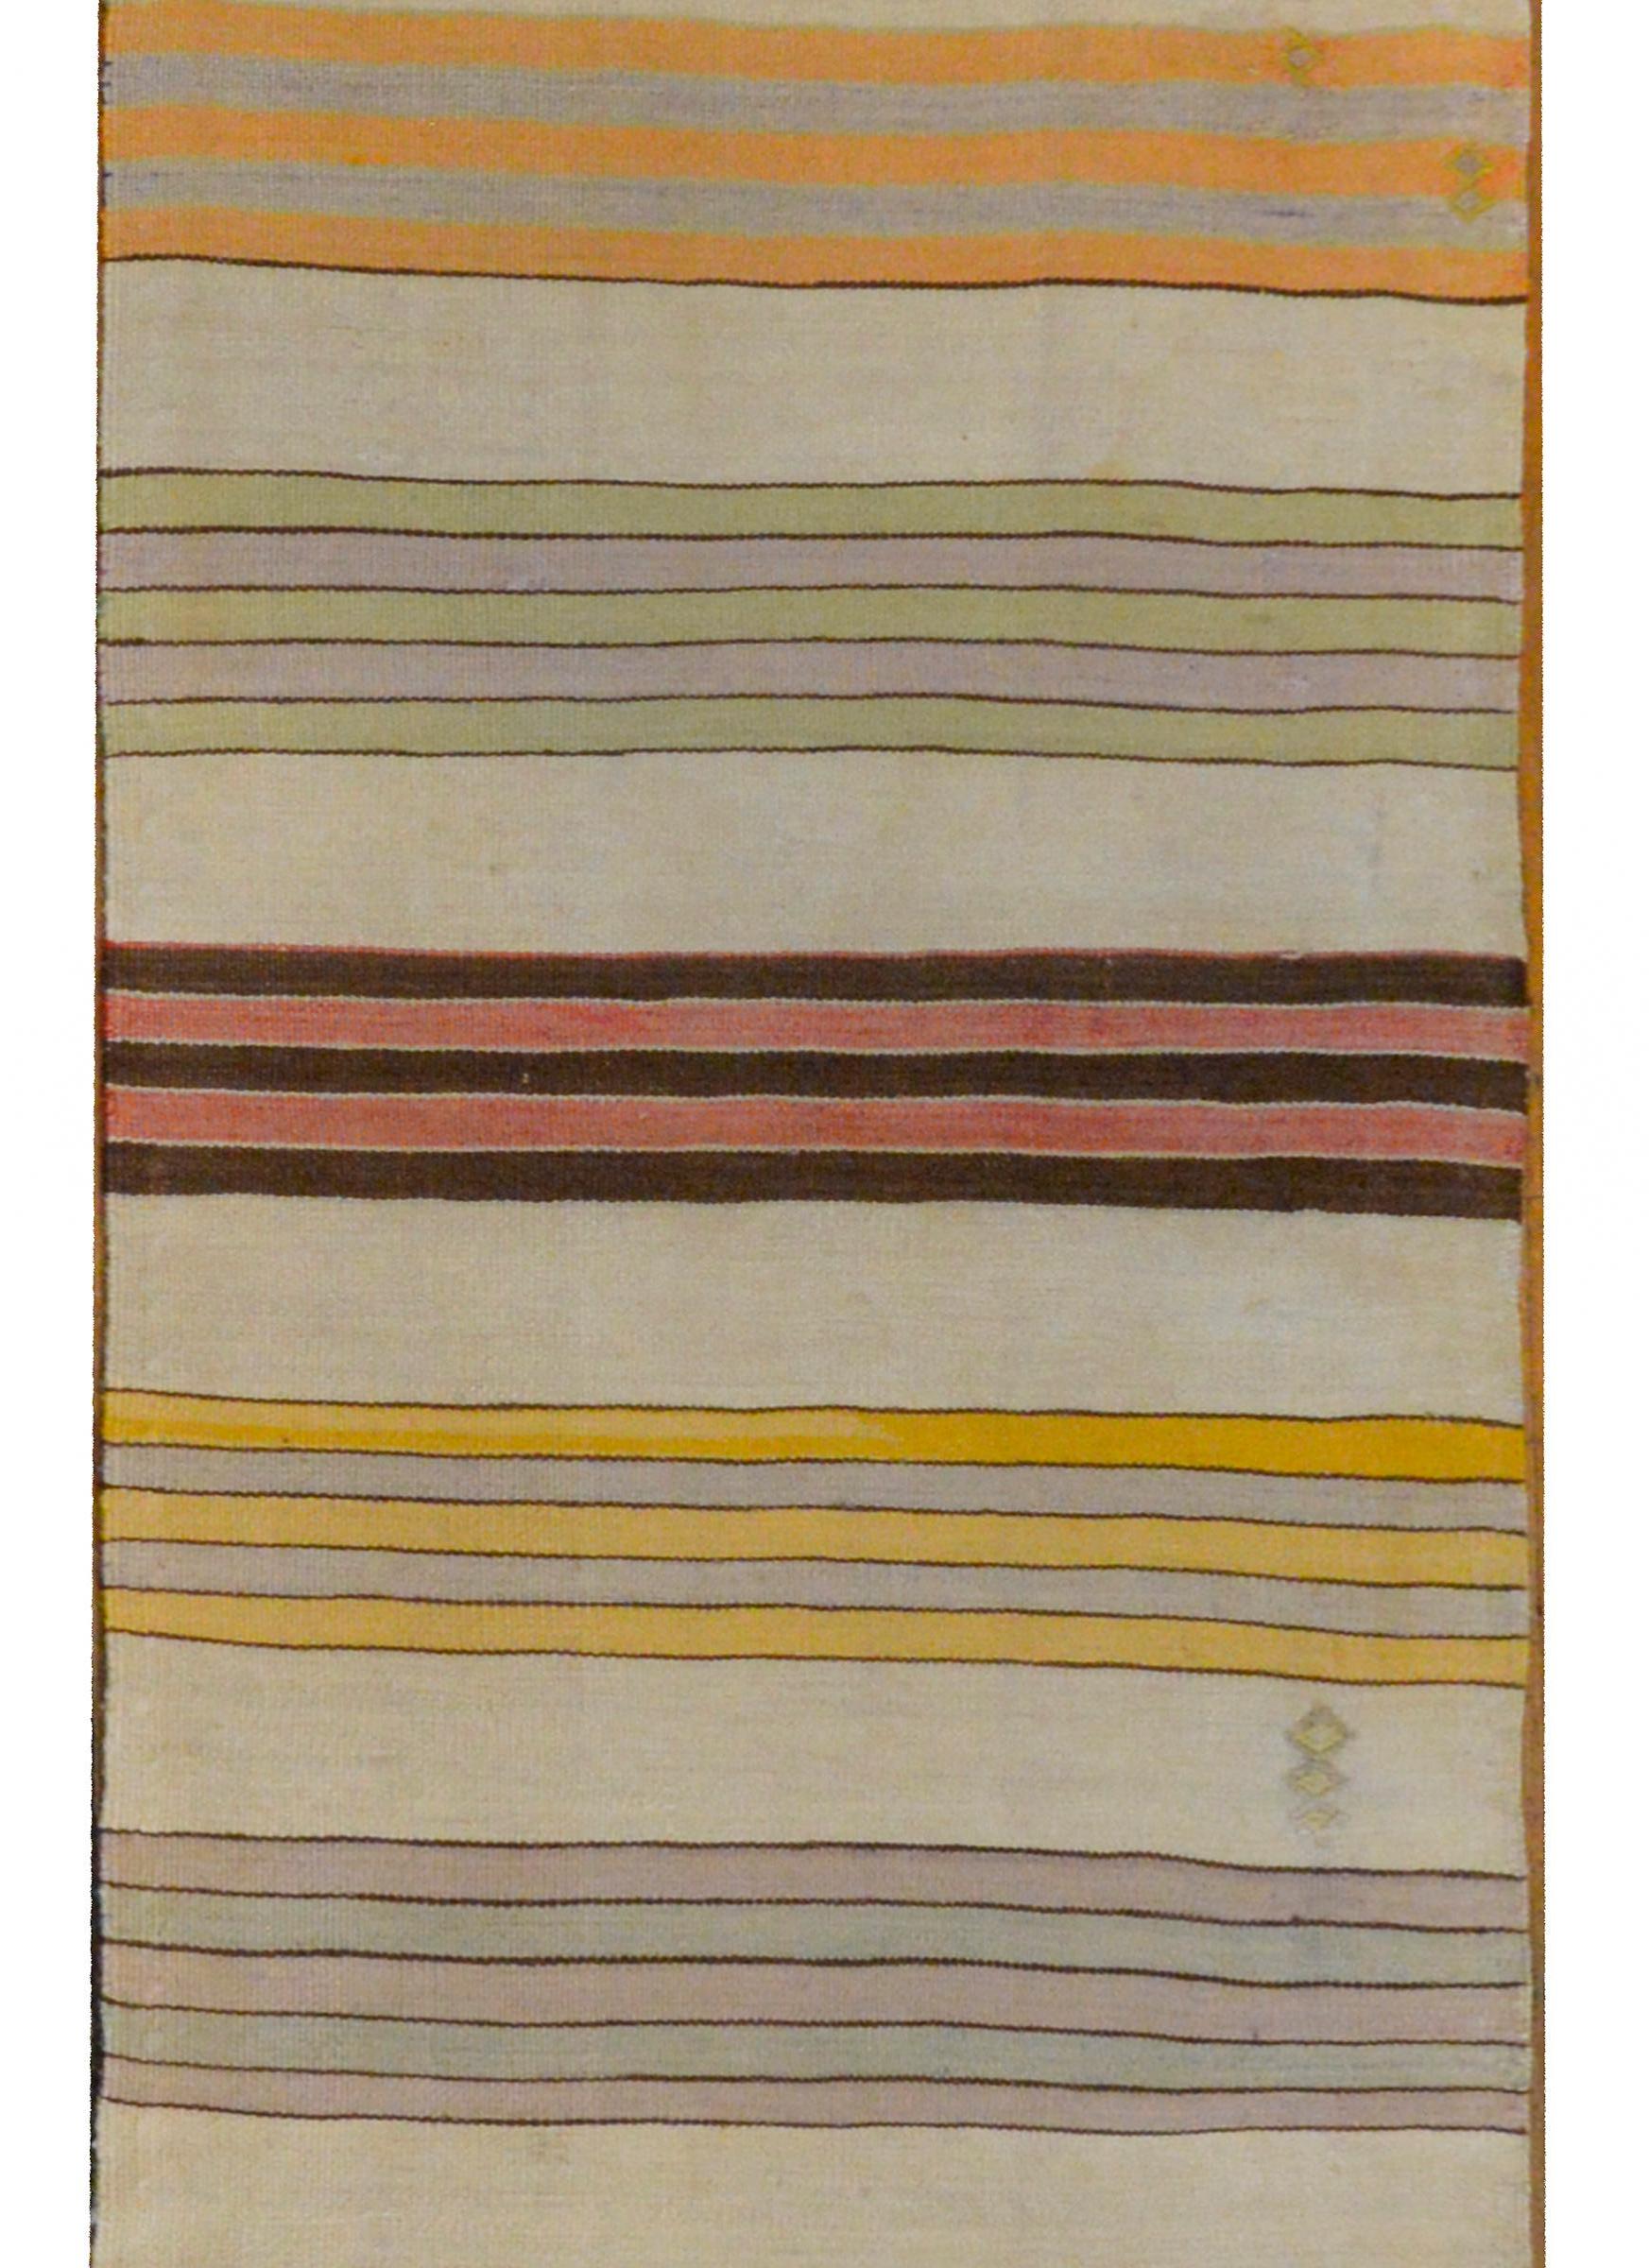 A beautiful vintage mid-20th century Turkish Konya kilim runner with a striped pattern of pastel colored stripes with a geometric design on each end.